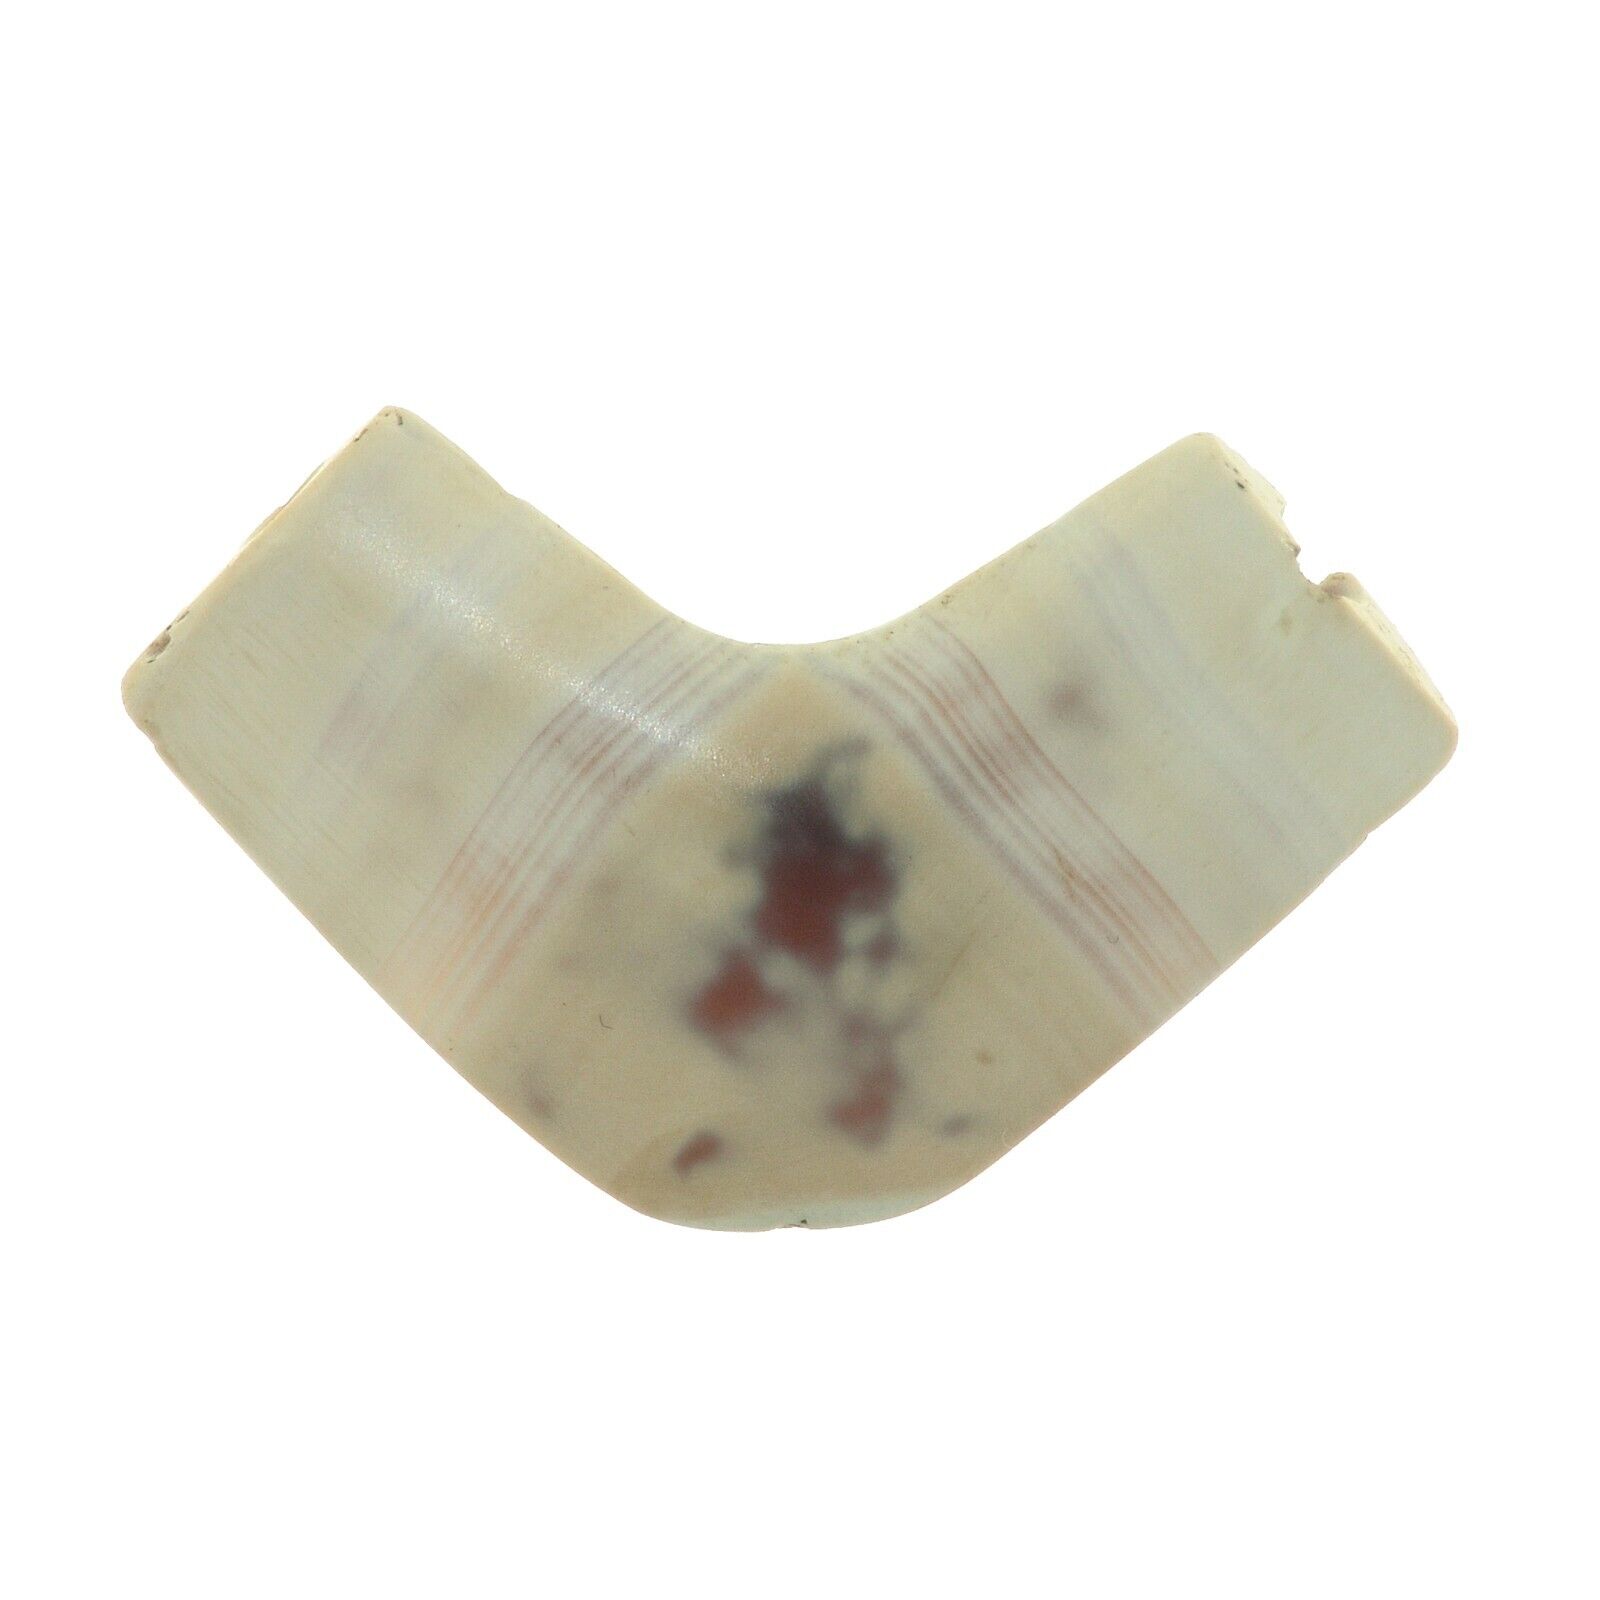 (0602) Antique banded  Agate Bead from China-Tibet,  唐朝